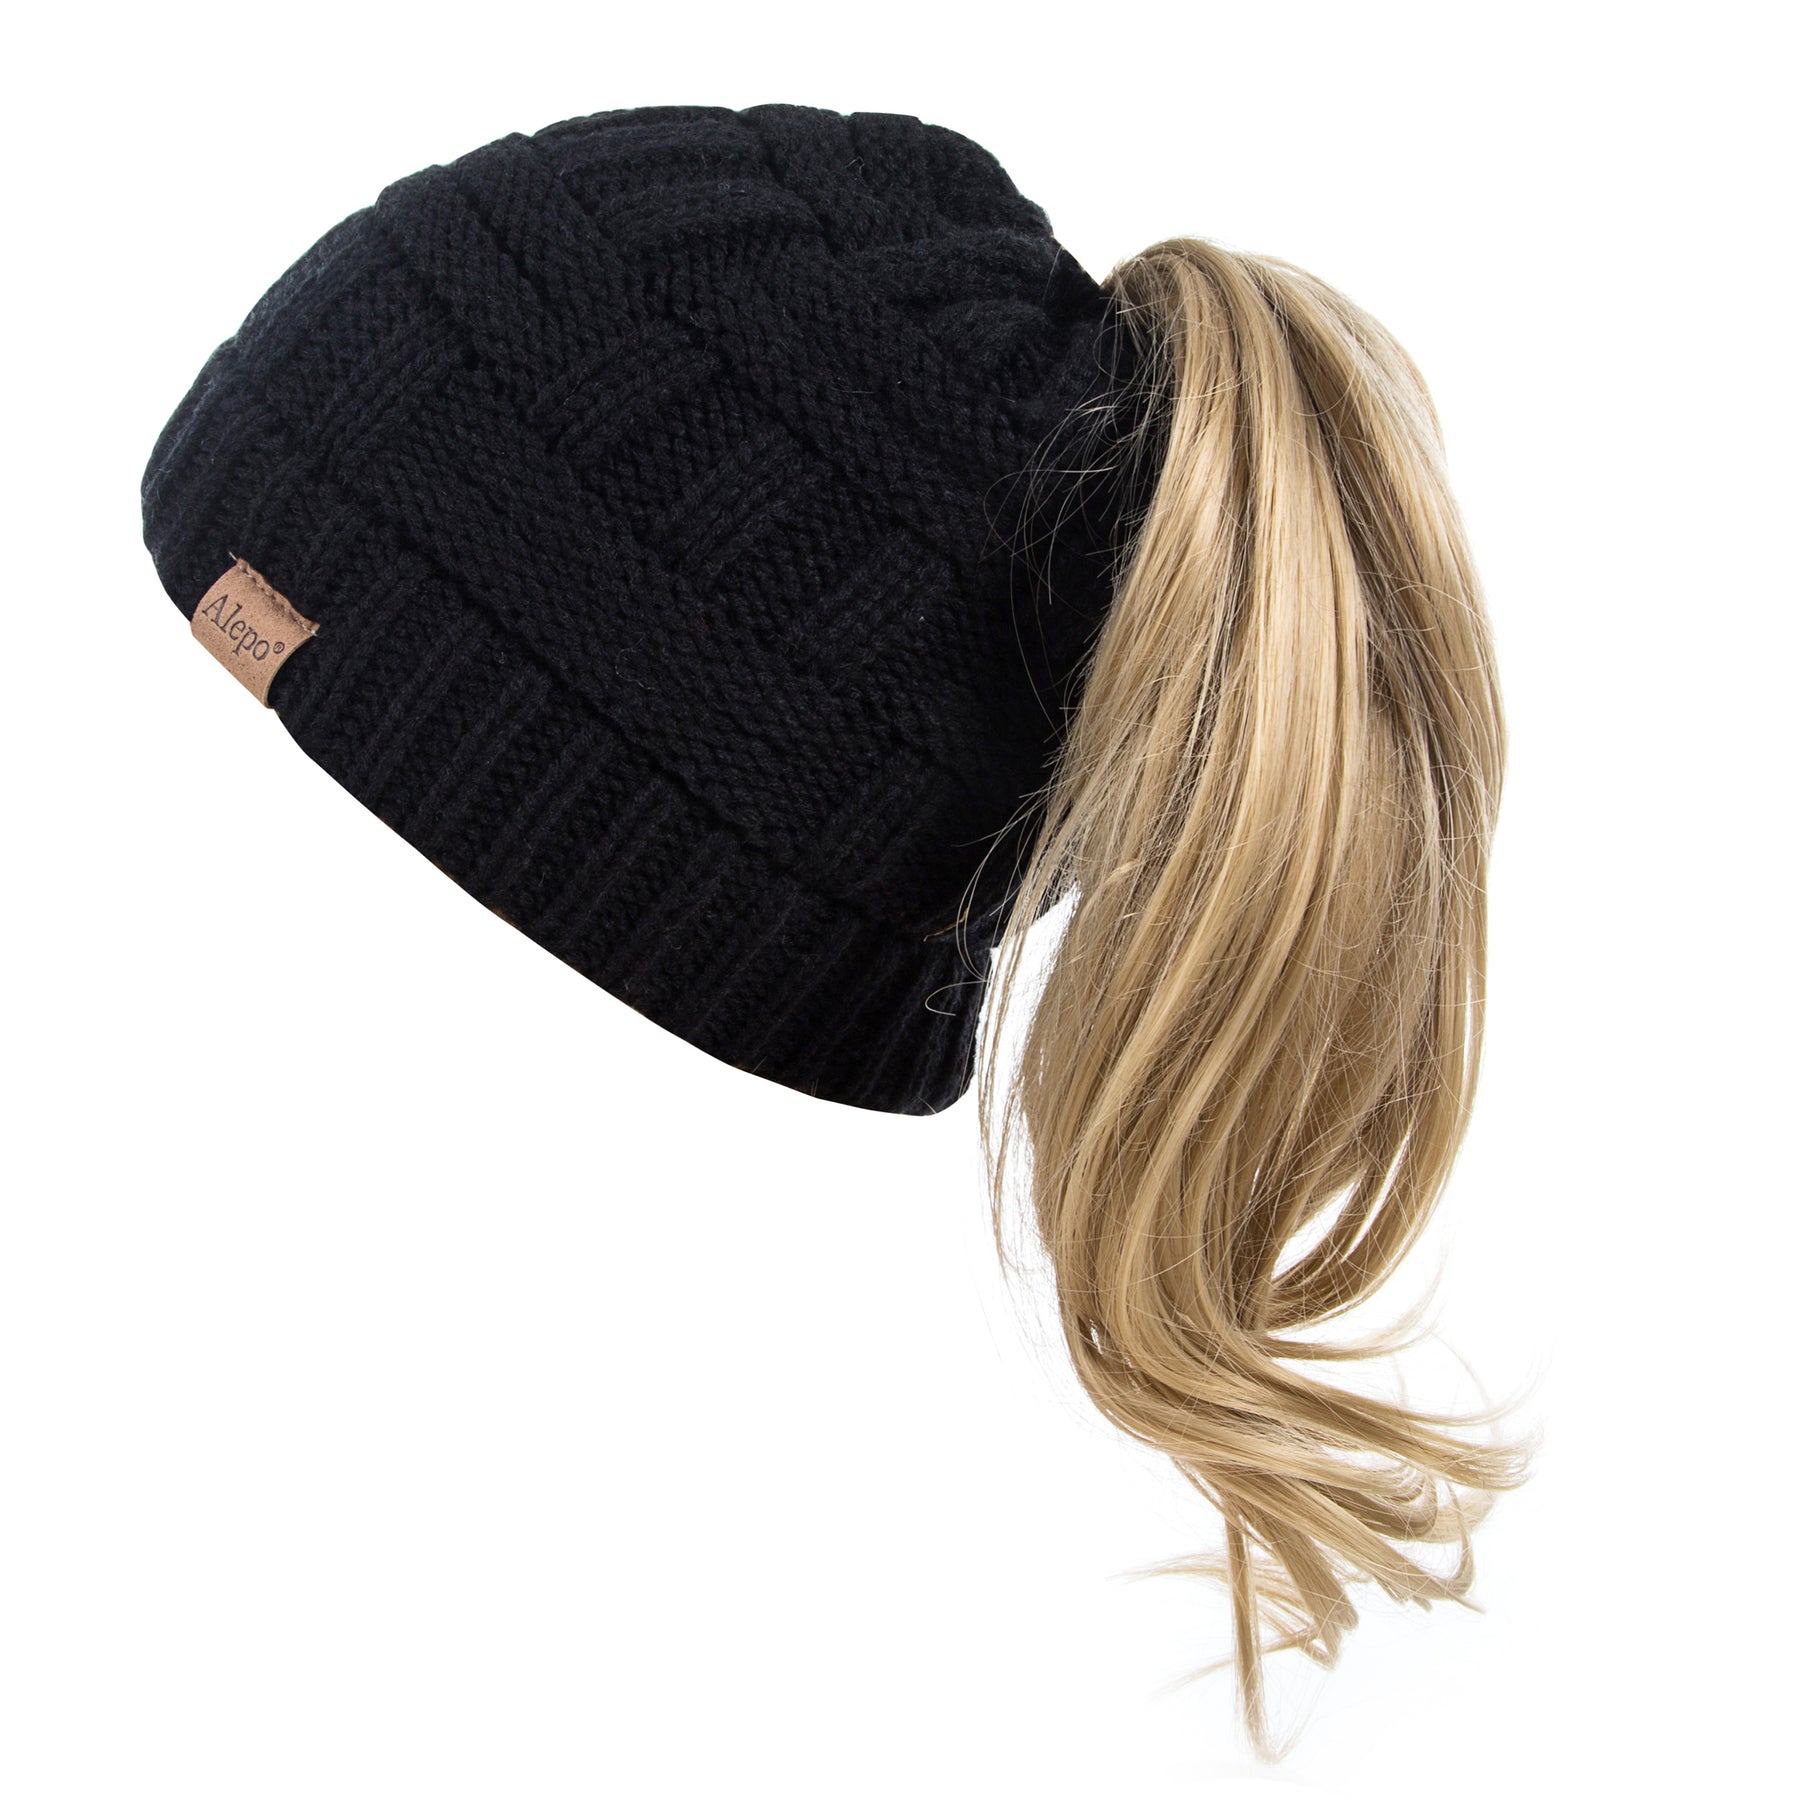 Alepo Women’s High Messy Bun Beanie Hat With Ponytail Hole